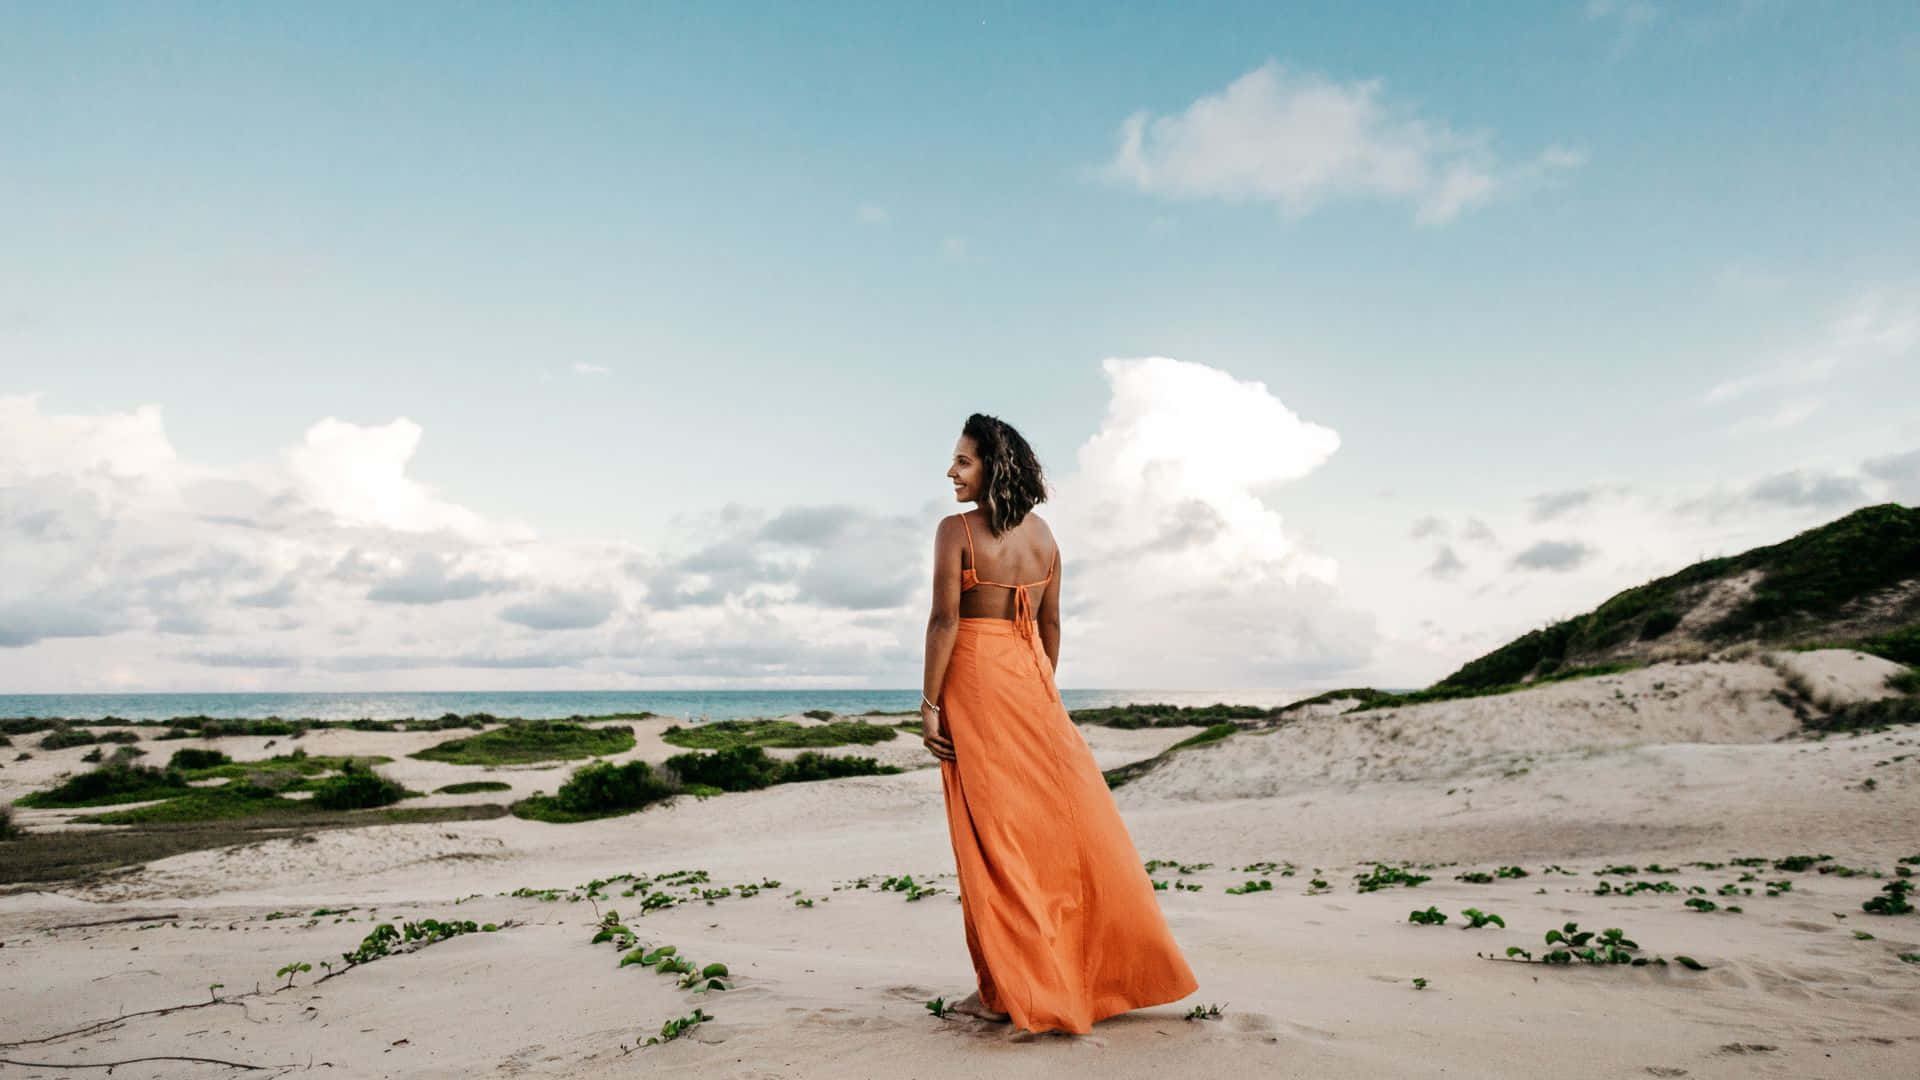 A Woman In An Orange Dress Standing On The Beach